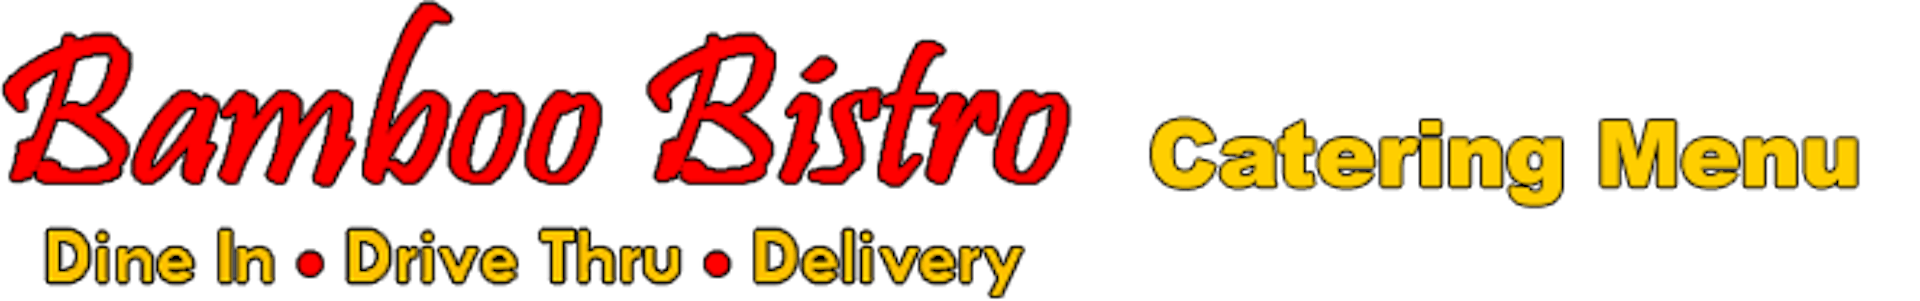 Bamboo Bistro Catering